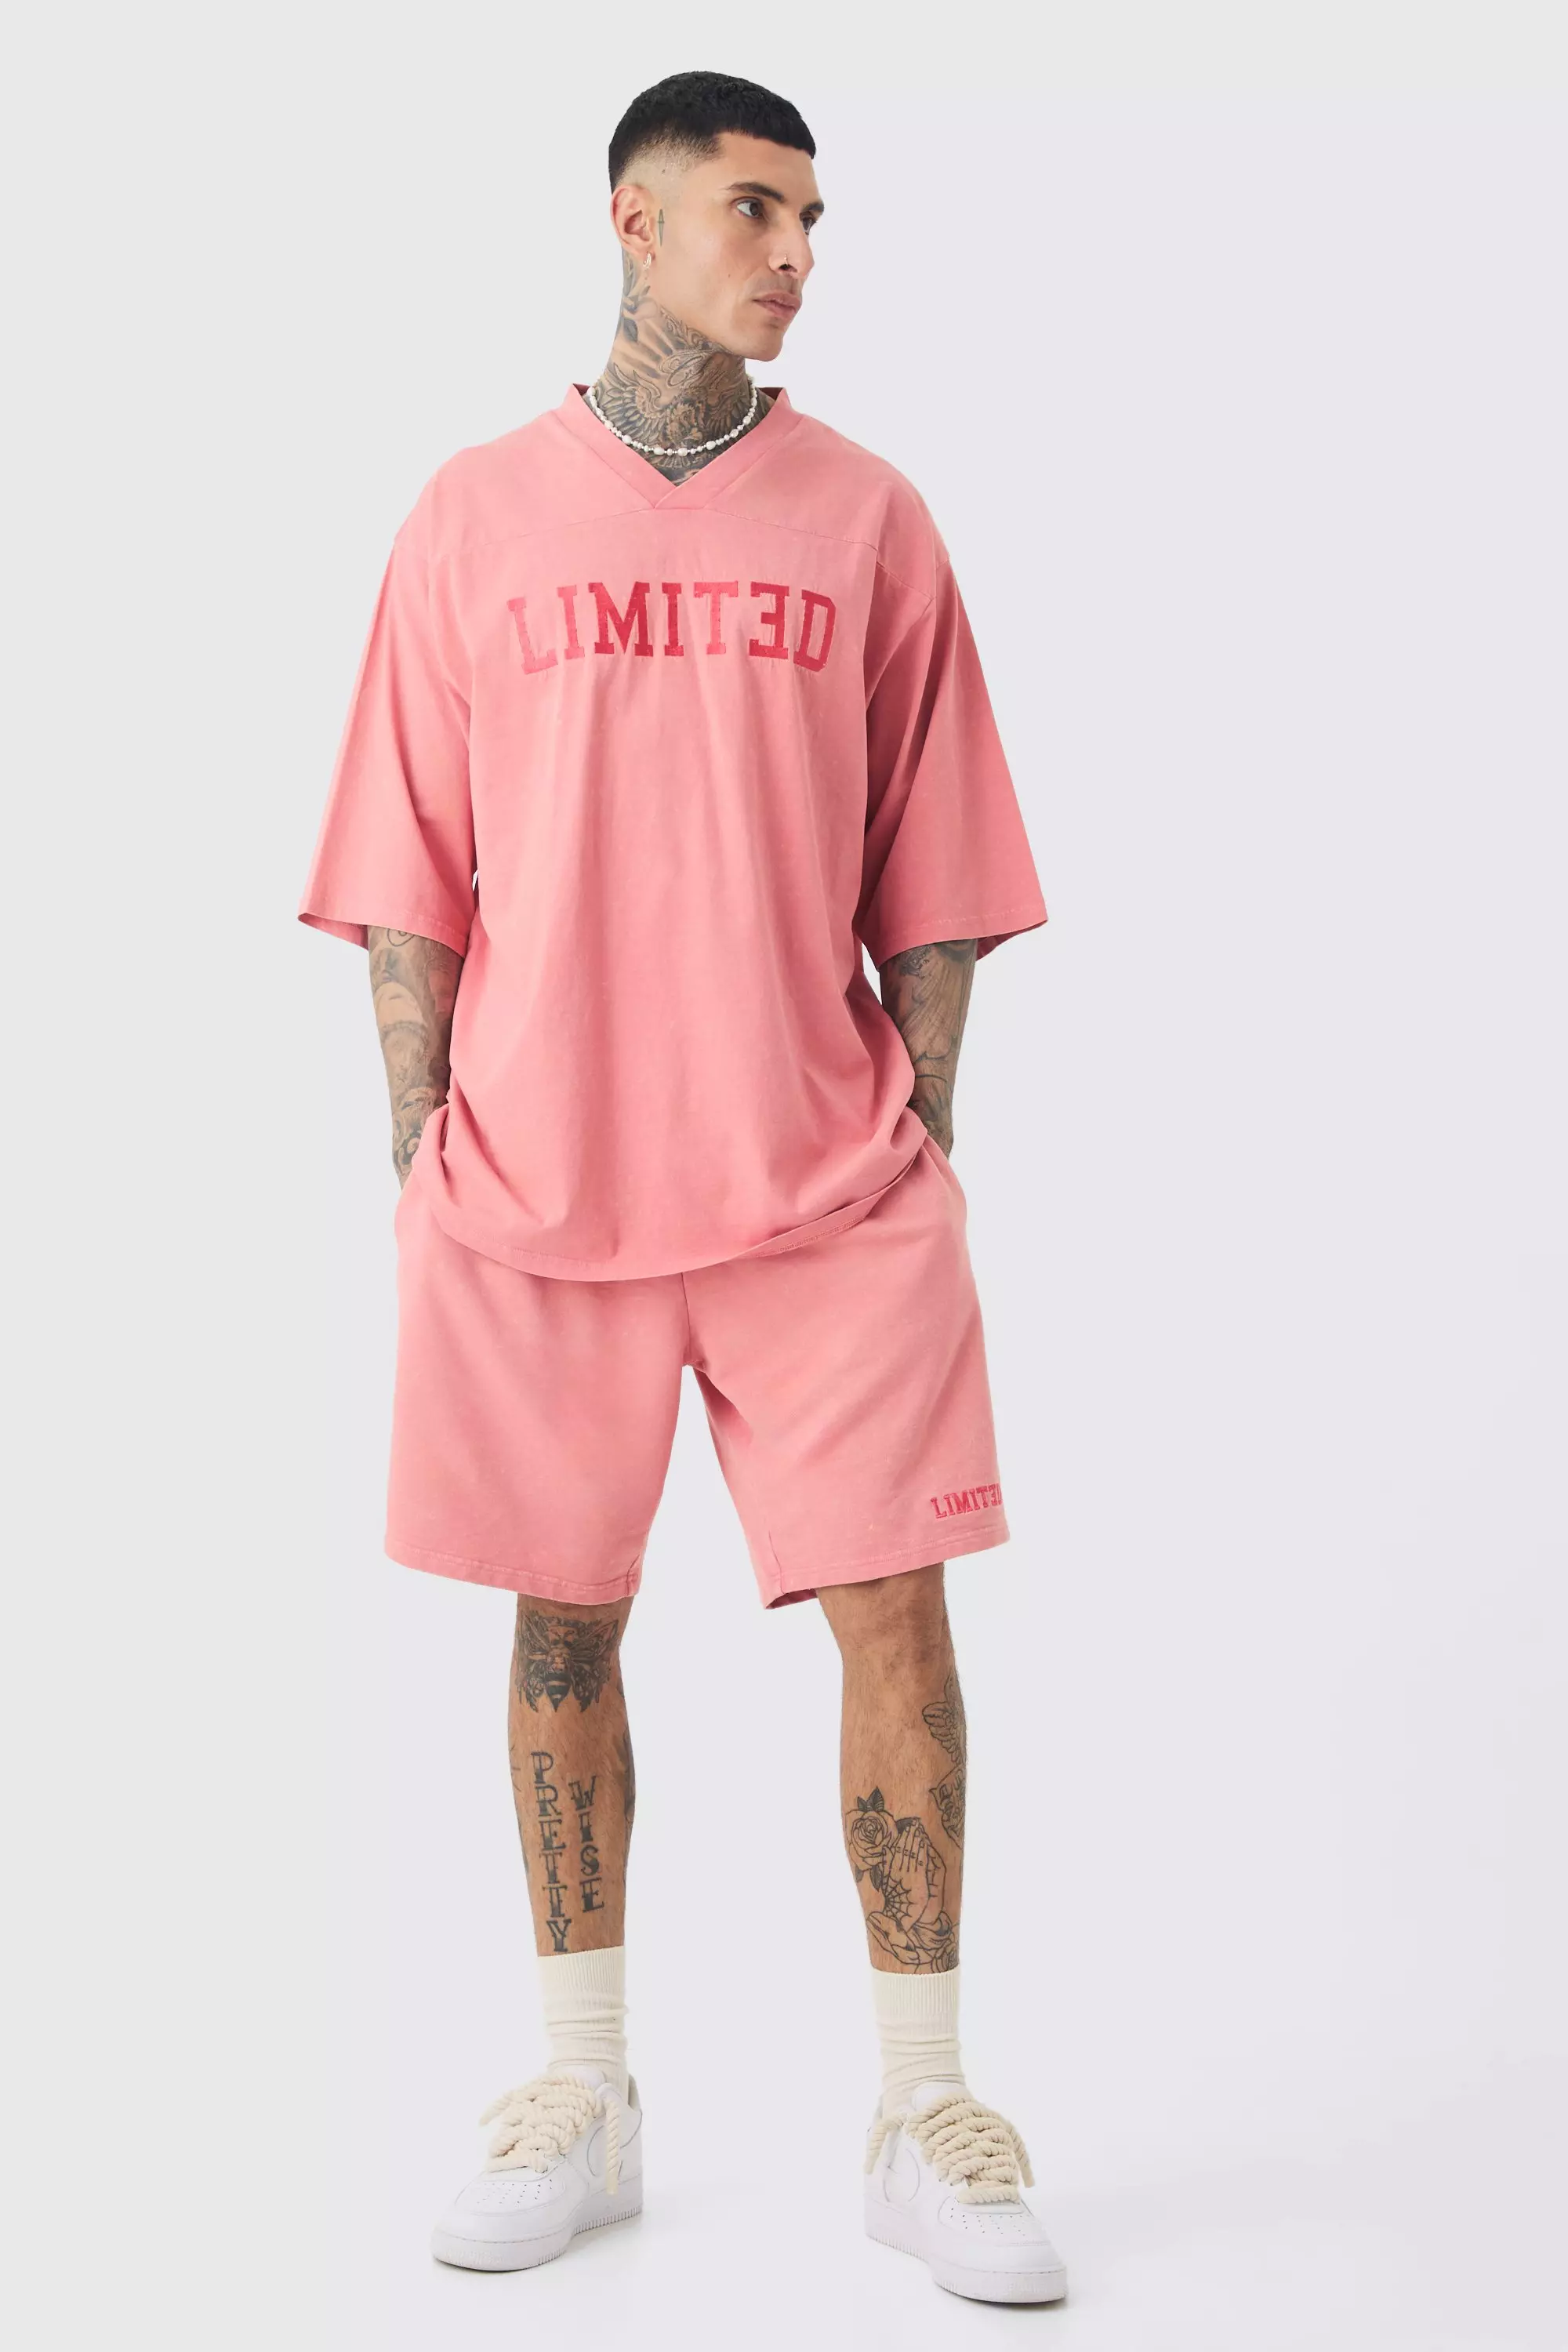 Pink Tall Embroidery Limited Football T-shirt & Short Set